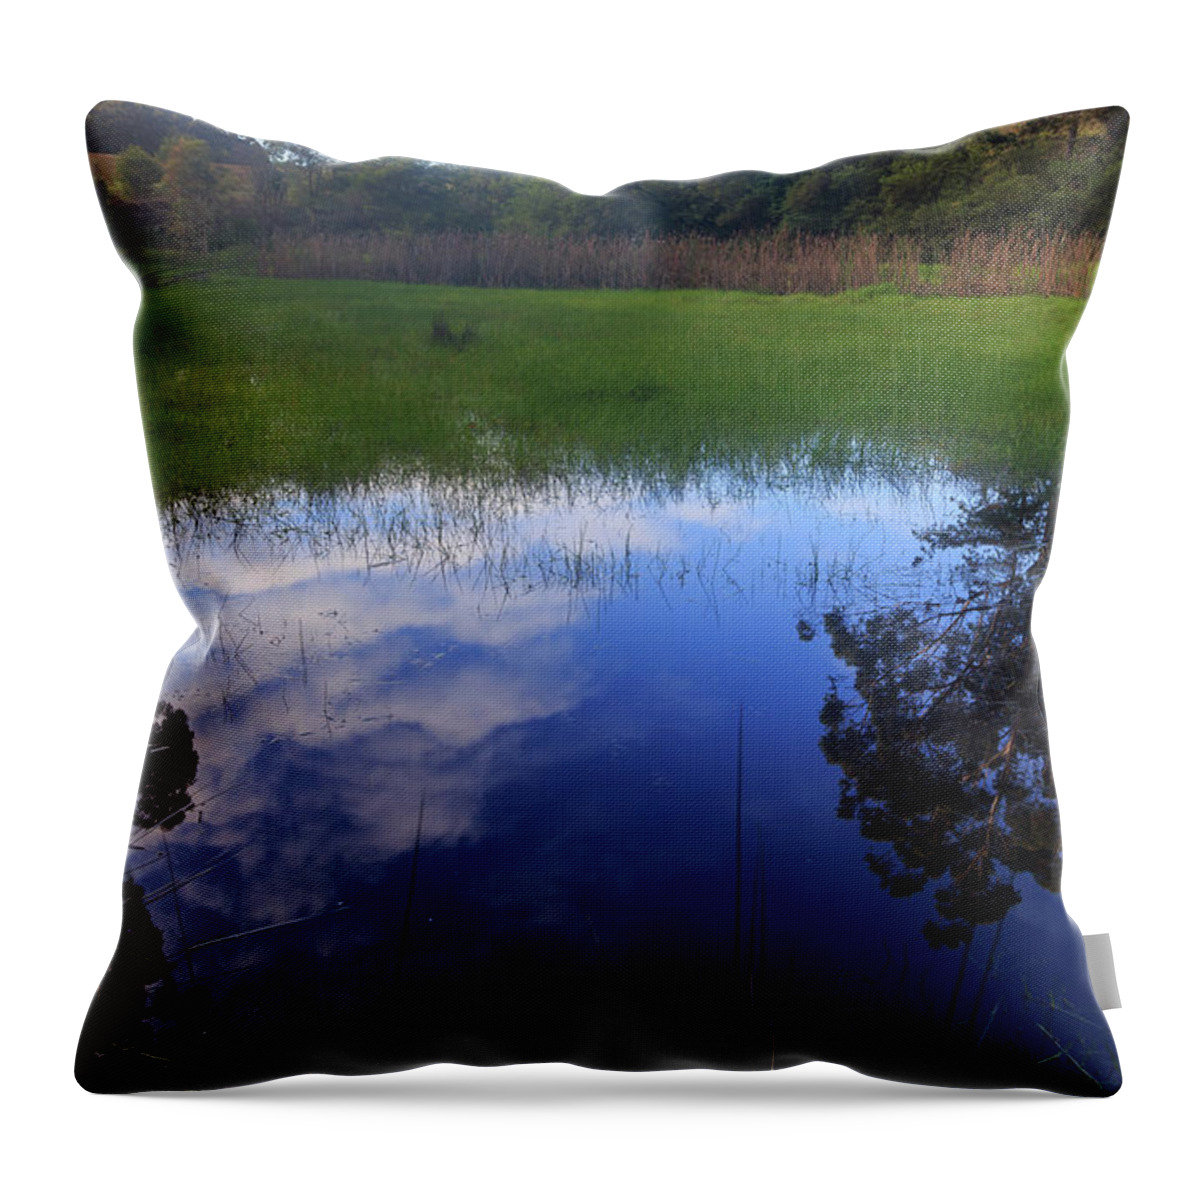 Landscape Throw Pillow featuring the photograph Natural Reflections by Robert Caddy